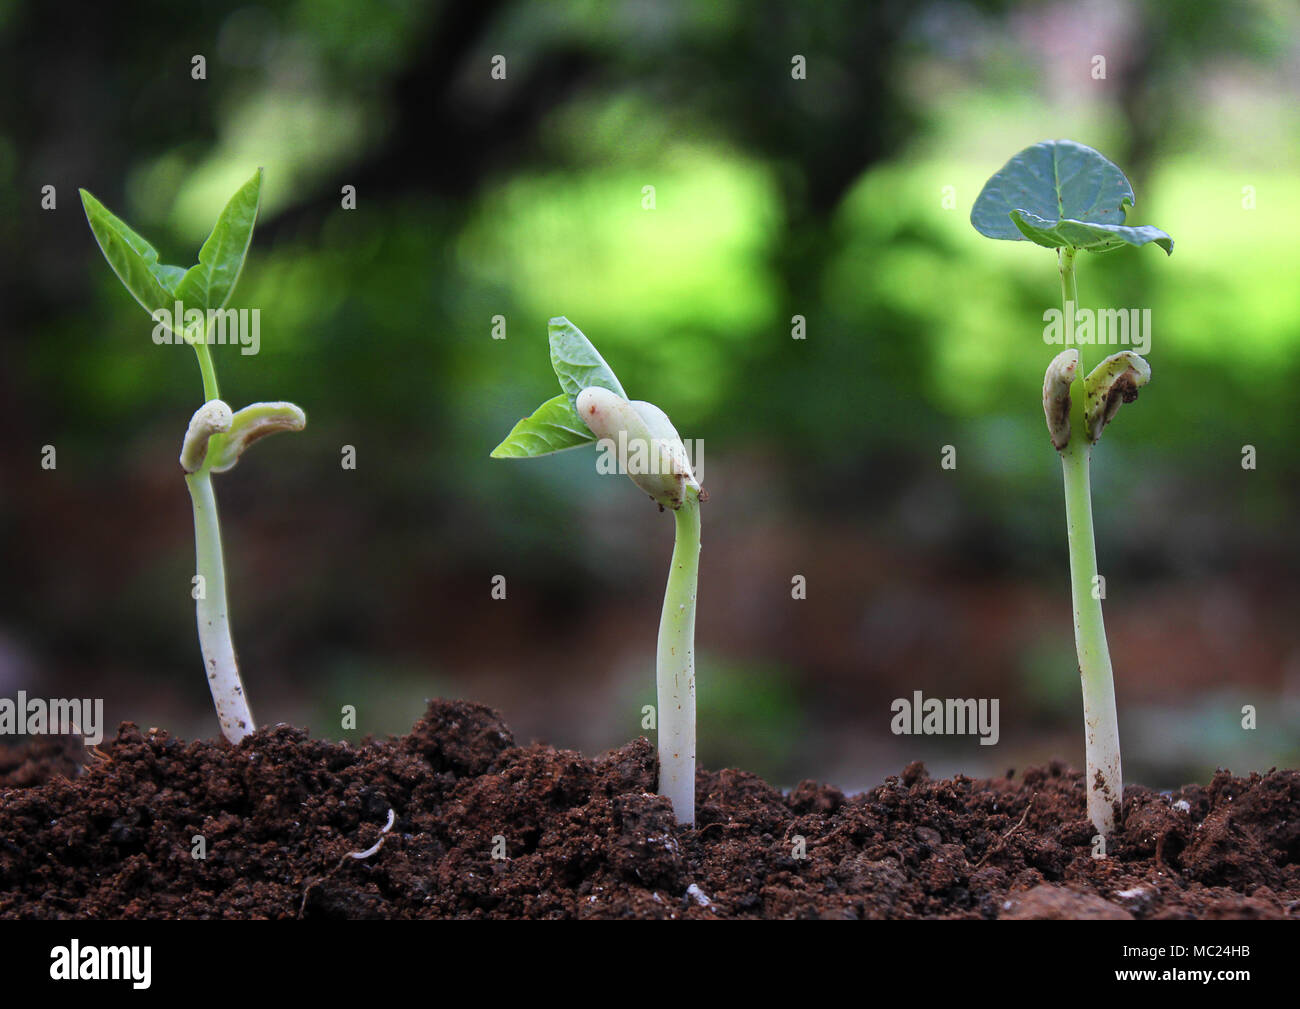 trees growing on fertile soil in germination sequence / growing plants / plant growth Stock Photo